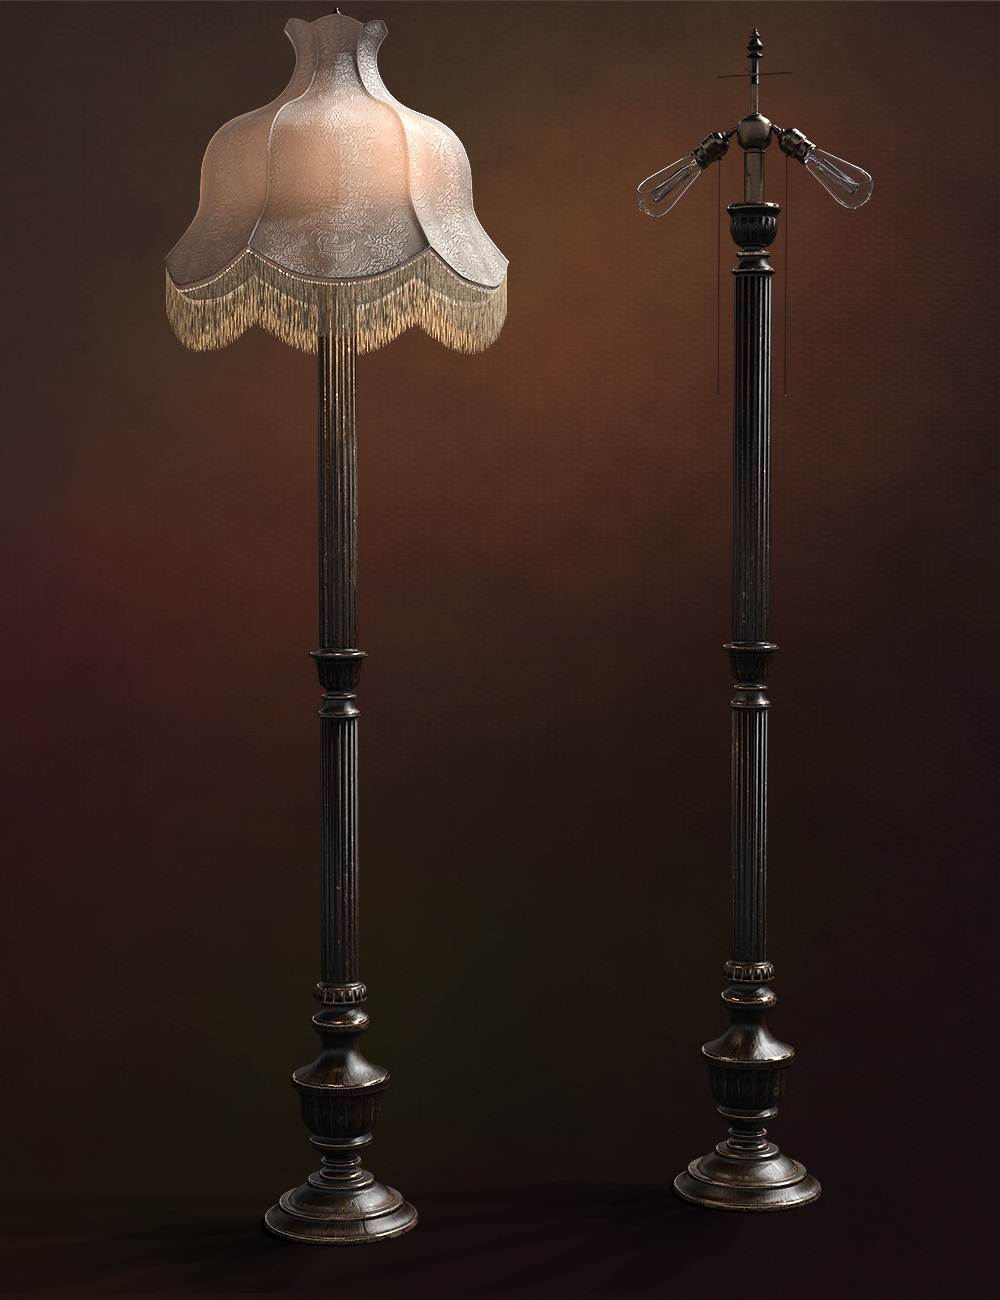 Vintage Lamps Iray by: LaurieS, 3D Models by Daz 3D